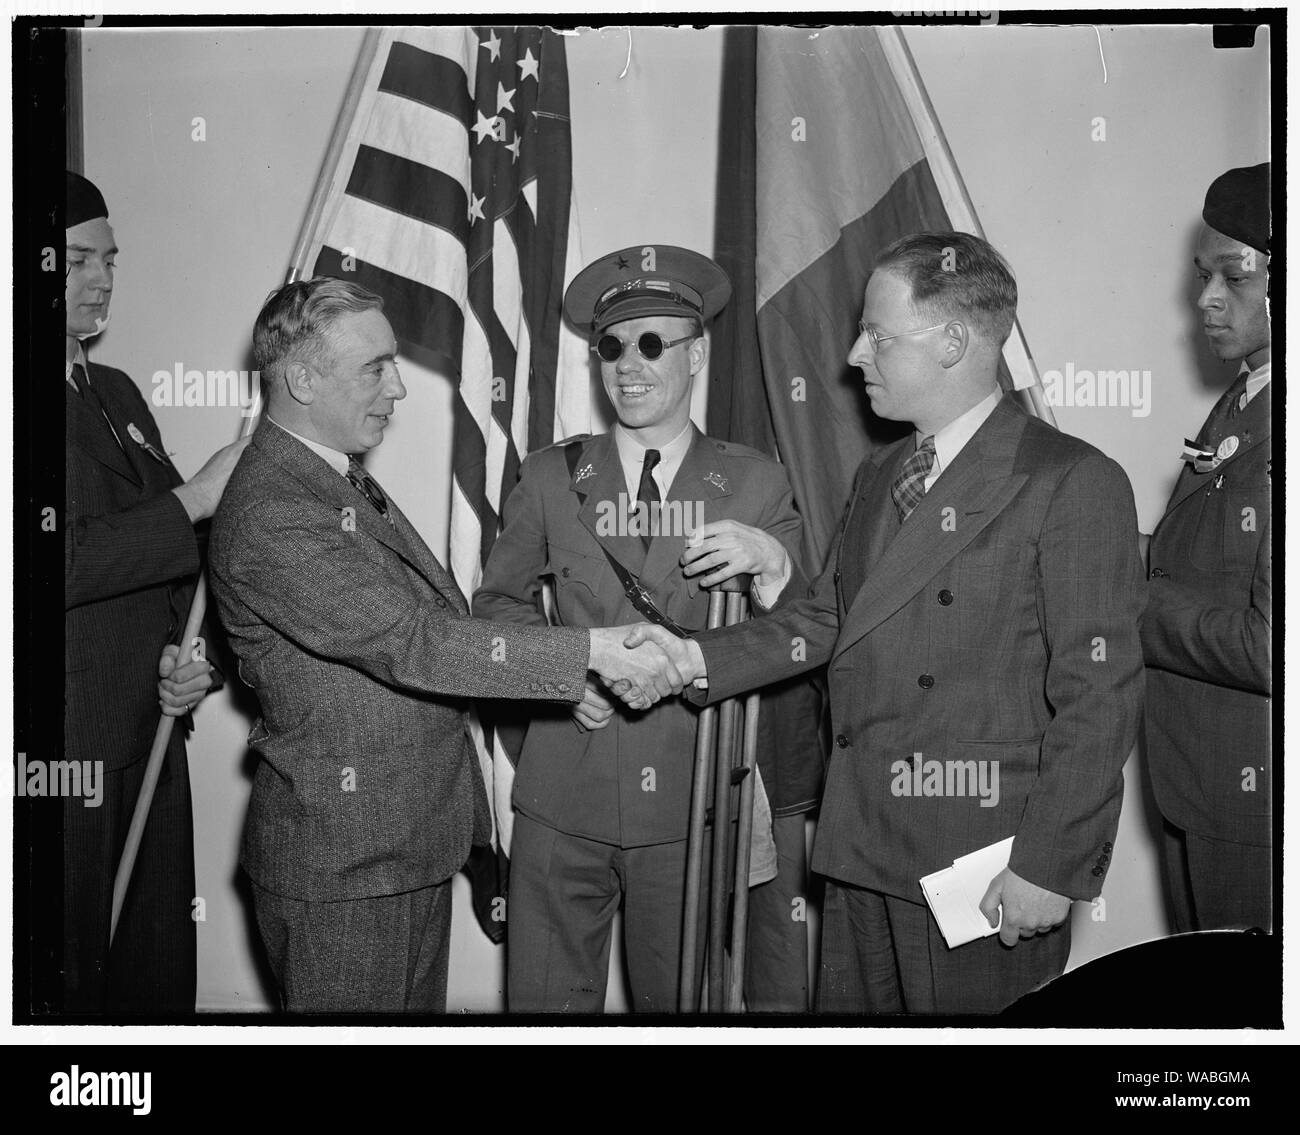 Communists get together. Washington, D.C., Feb. 12. Americans, all of whom fought and many wounded while fighting for the Loyalists in Spain, met today in Washington at the First National Conference of the Veterans of the Abraham Lincoln Brigade, left to right: Francis J. Gorman, President of the United Textile Workers of America; Lieut. Robert Raven, wounded and blinded in the Spanish War; and Commander Paul Burns of Boston Commander of the Lincoln Brigade, 2/12/38 Stock Photo